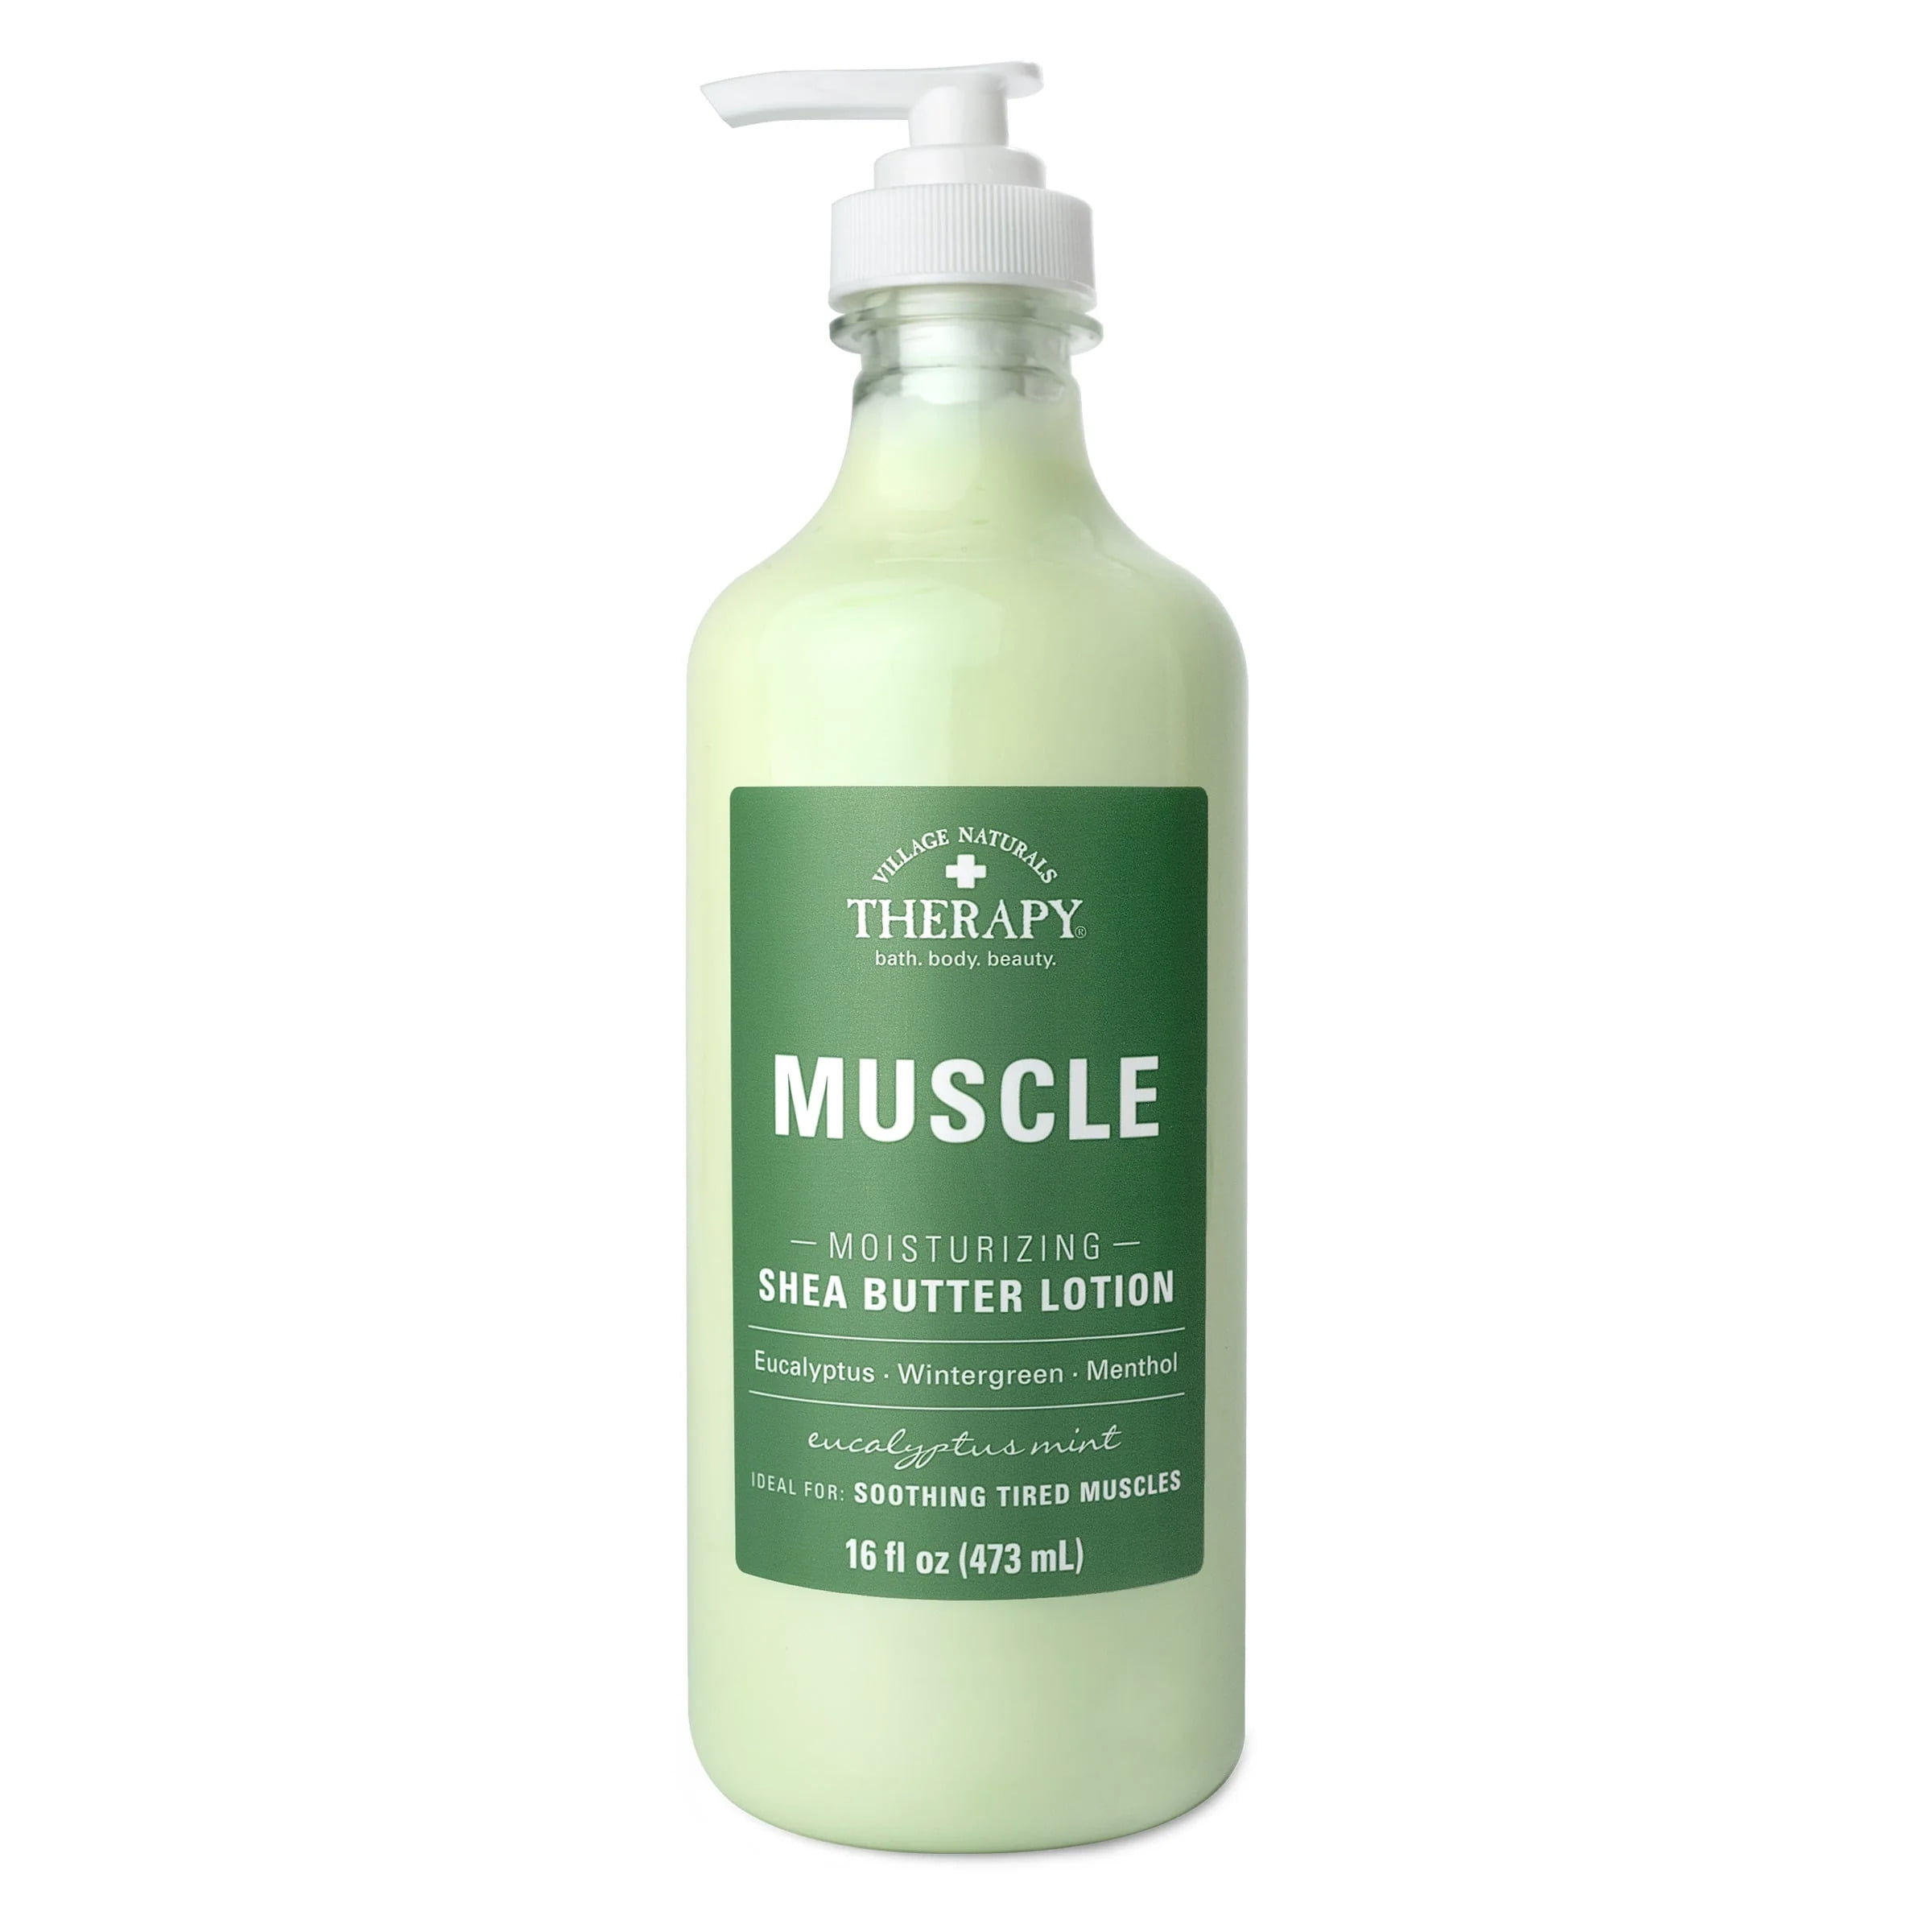 Village Naturals Therapy Muscle Relief Lotion For Aches & Pains